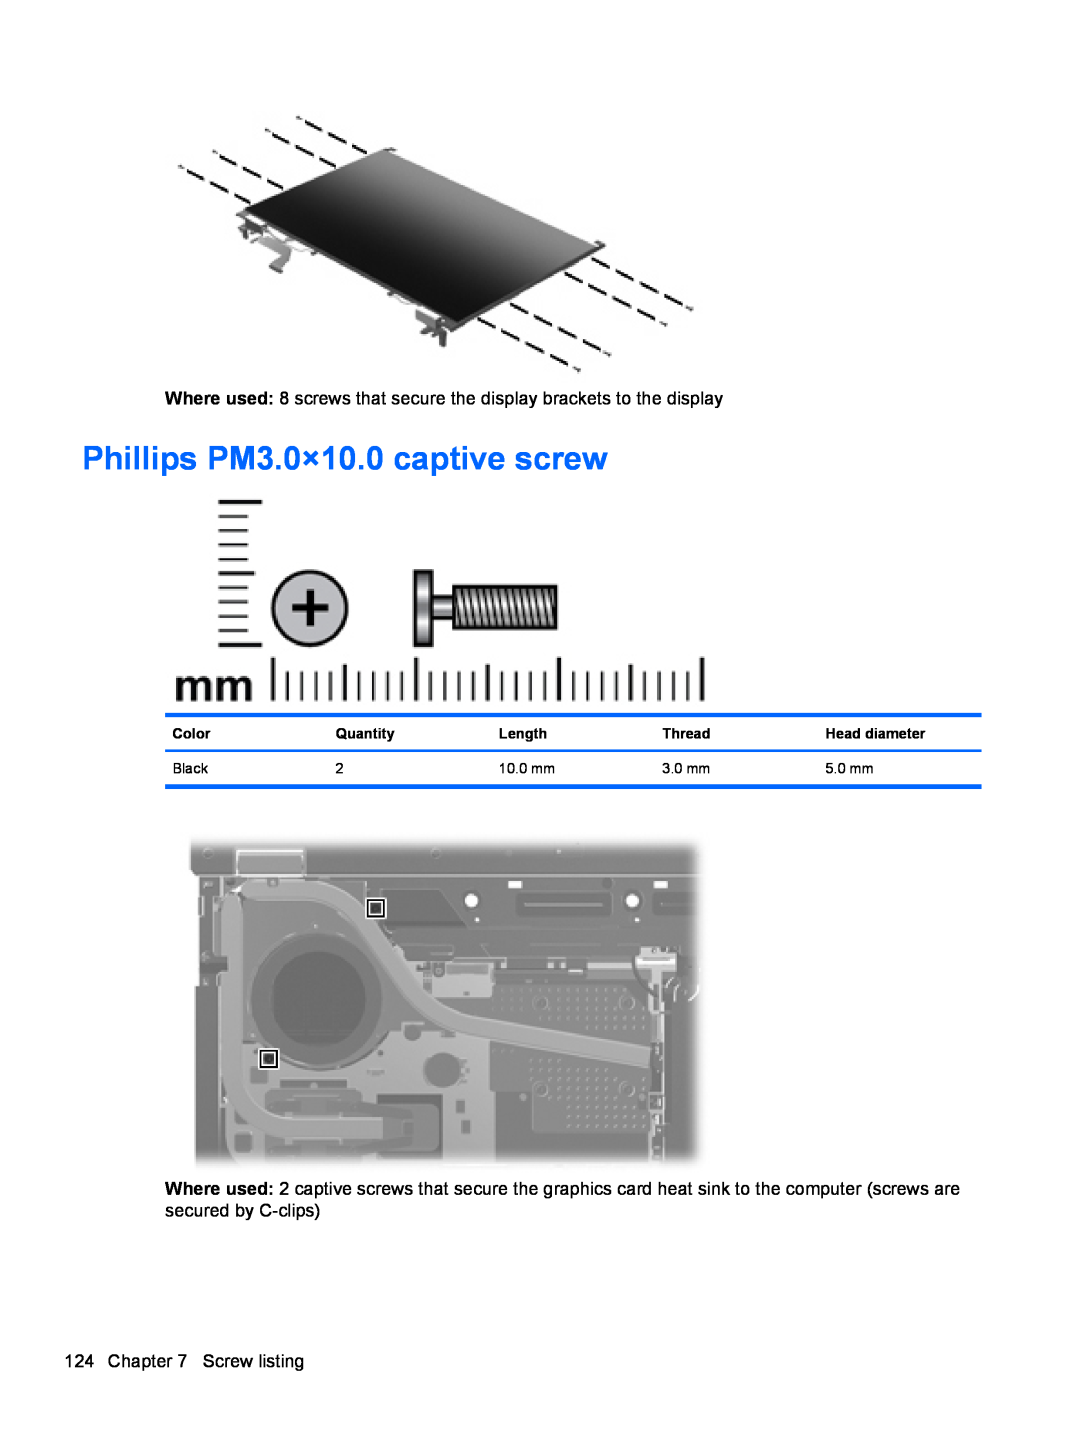 HP FN038UAABA manual Phillips PM3.0×10.0 captive screw, Where used 8 screws that secure the display brackets to the display 